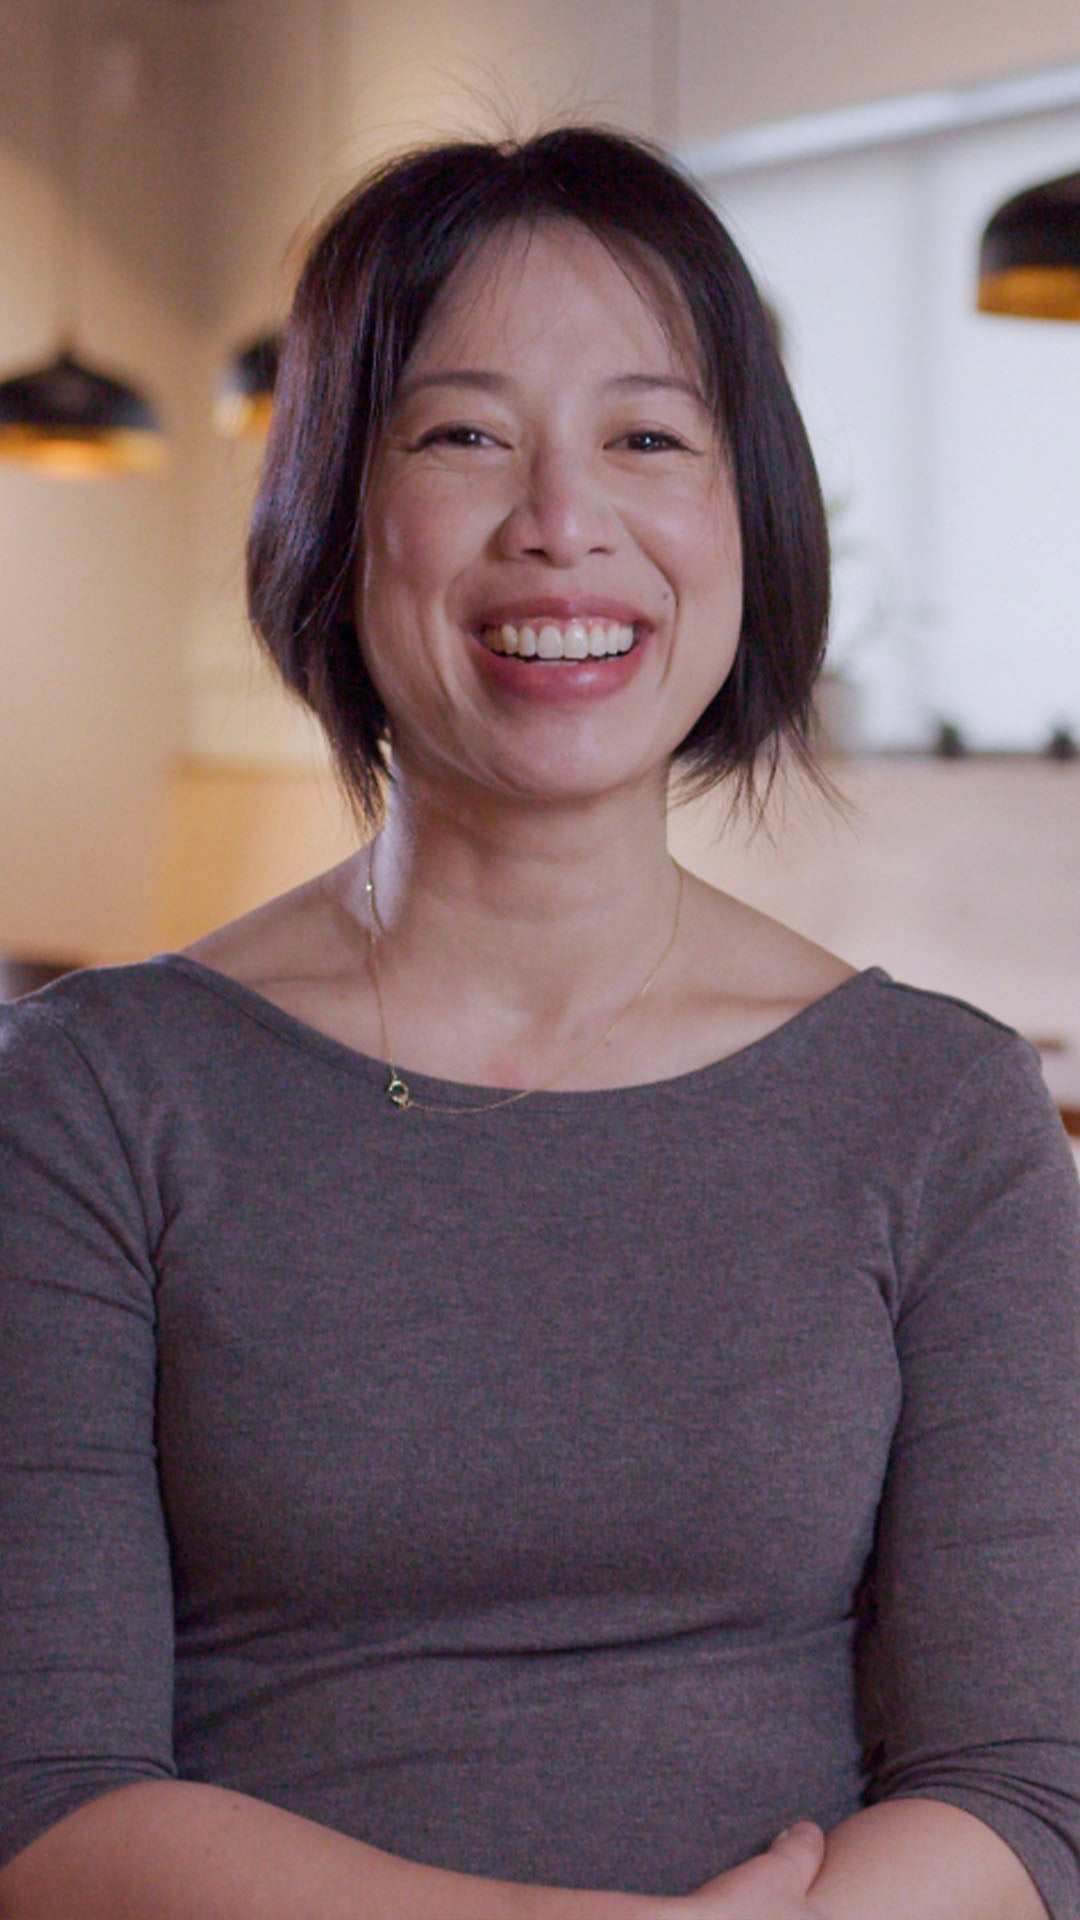 An image of Christine Ha. She is located in her restaurant, Xin Chao. She is smiling happily. Click play to watch video.